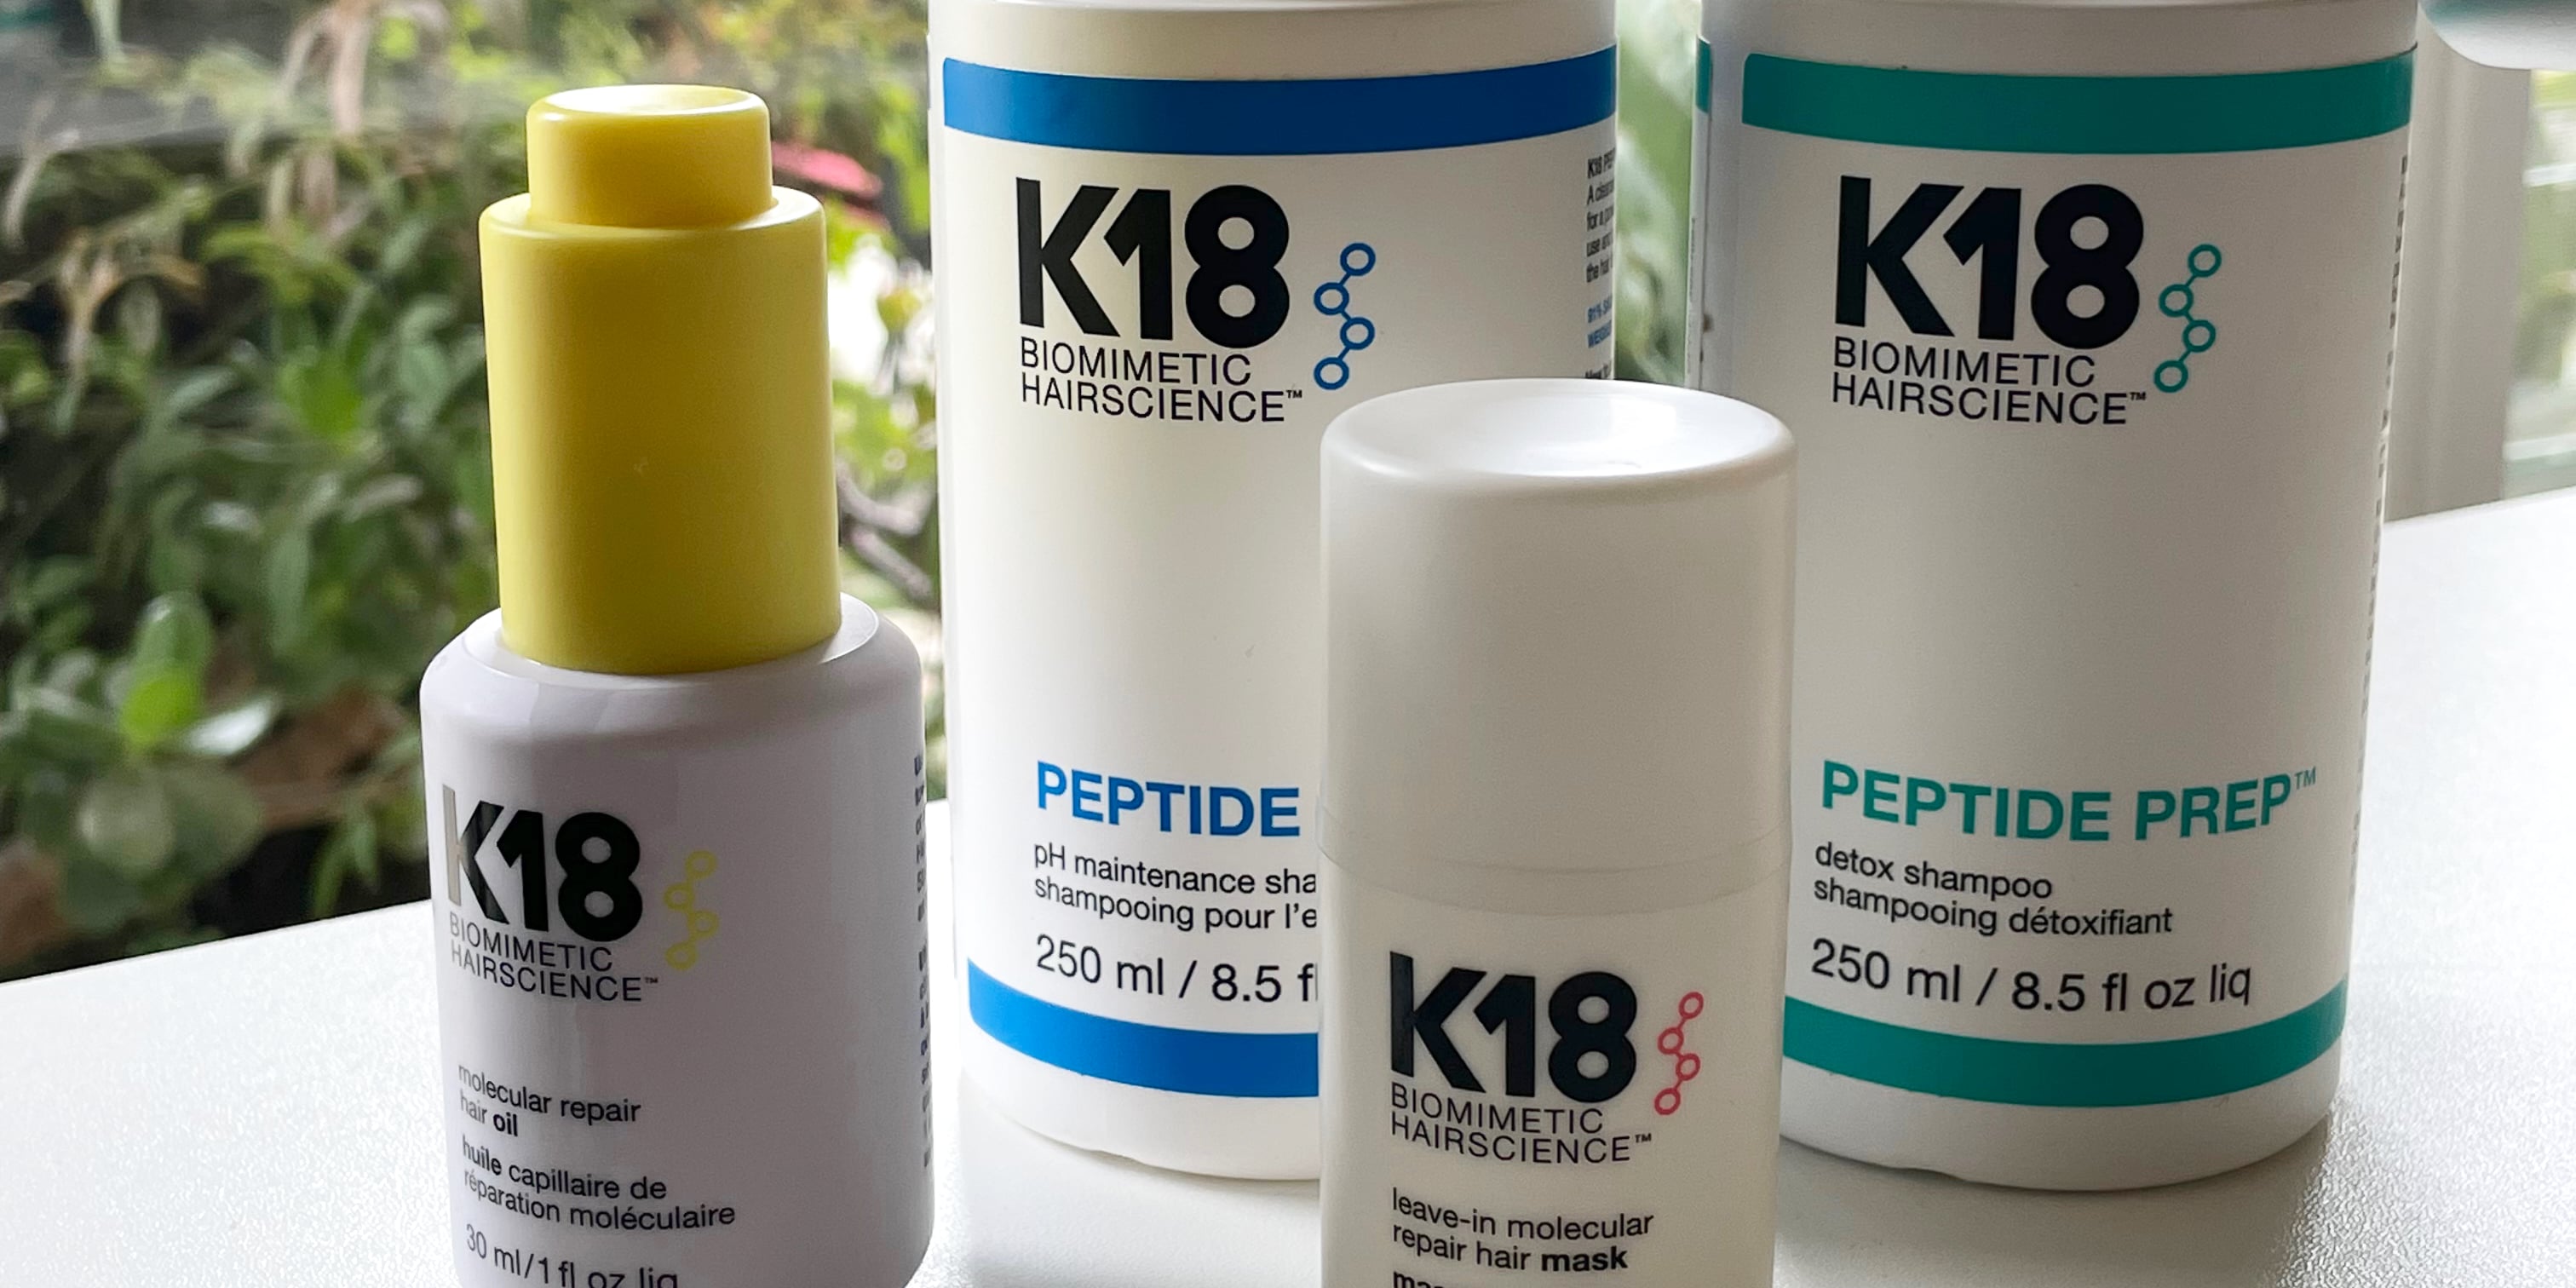 K18 Hair Product Reviews With Photos | POPSUGAR Beauty